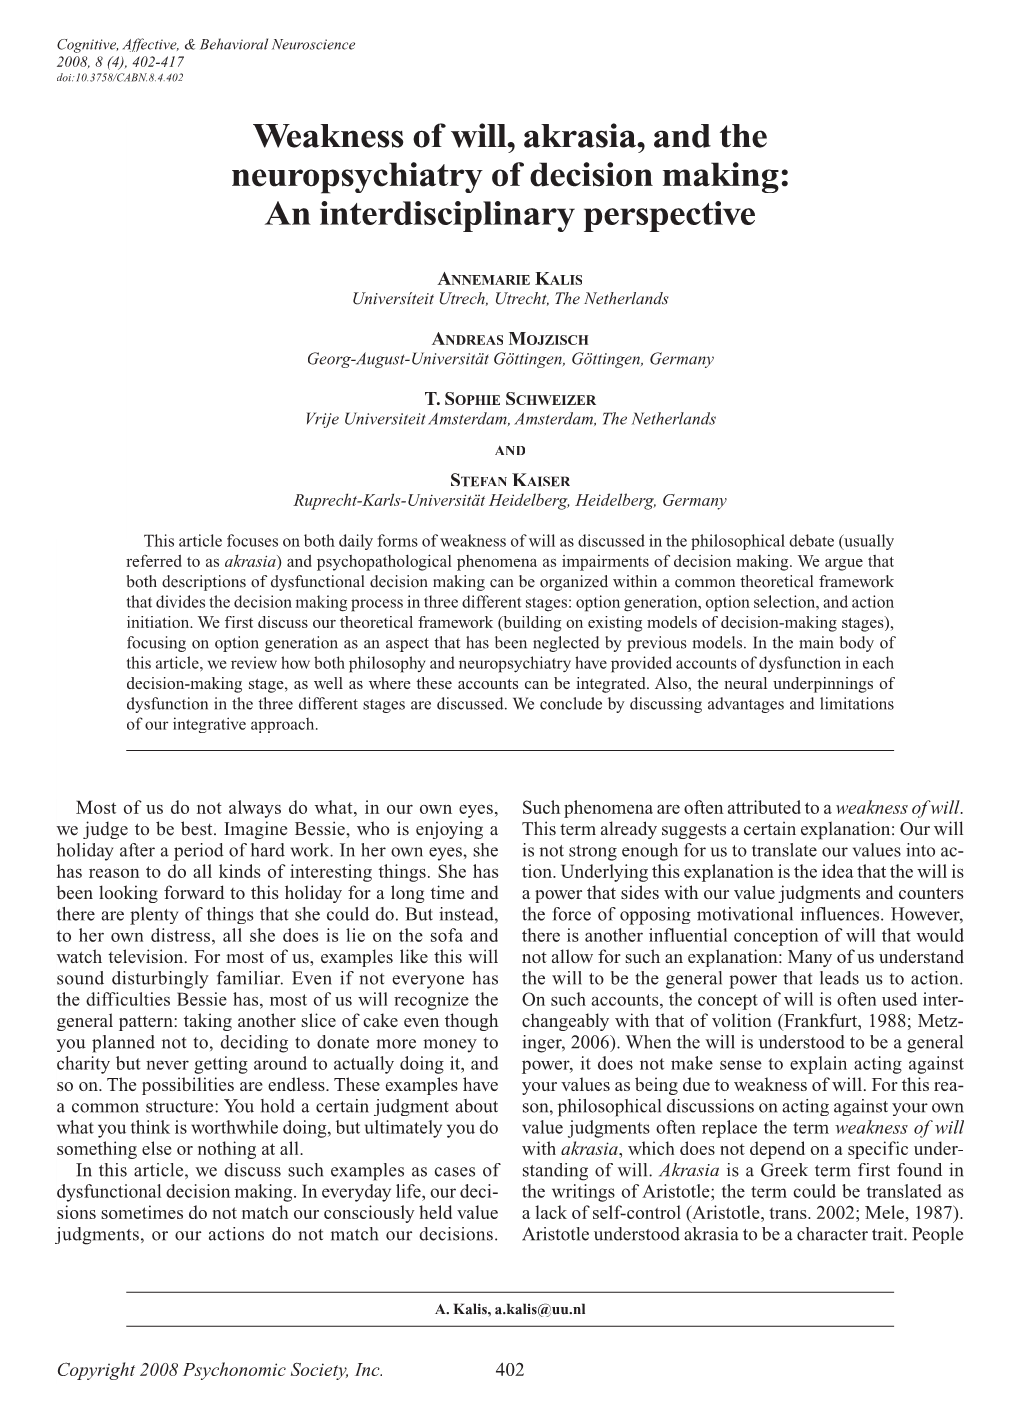 Weakness of Will, Akrasia, and the Neuropsychiatry of Decision Making: an Interdisciplinary Perspective